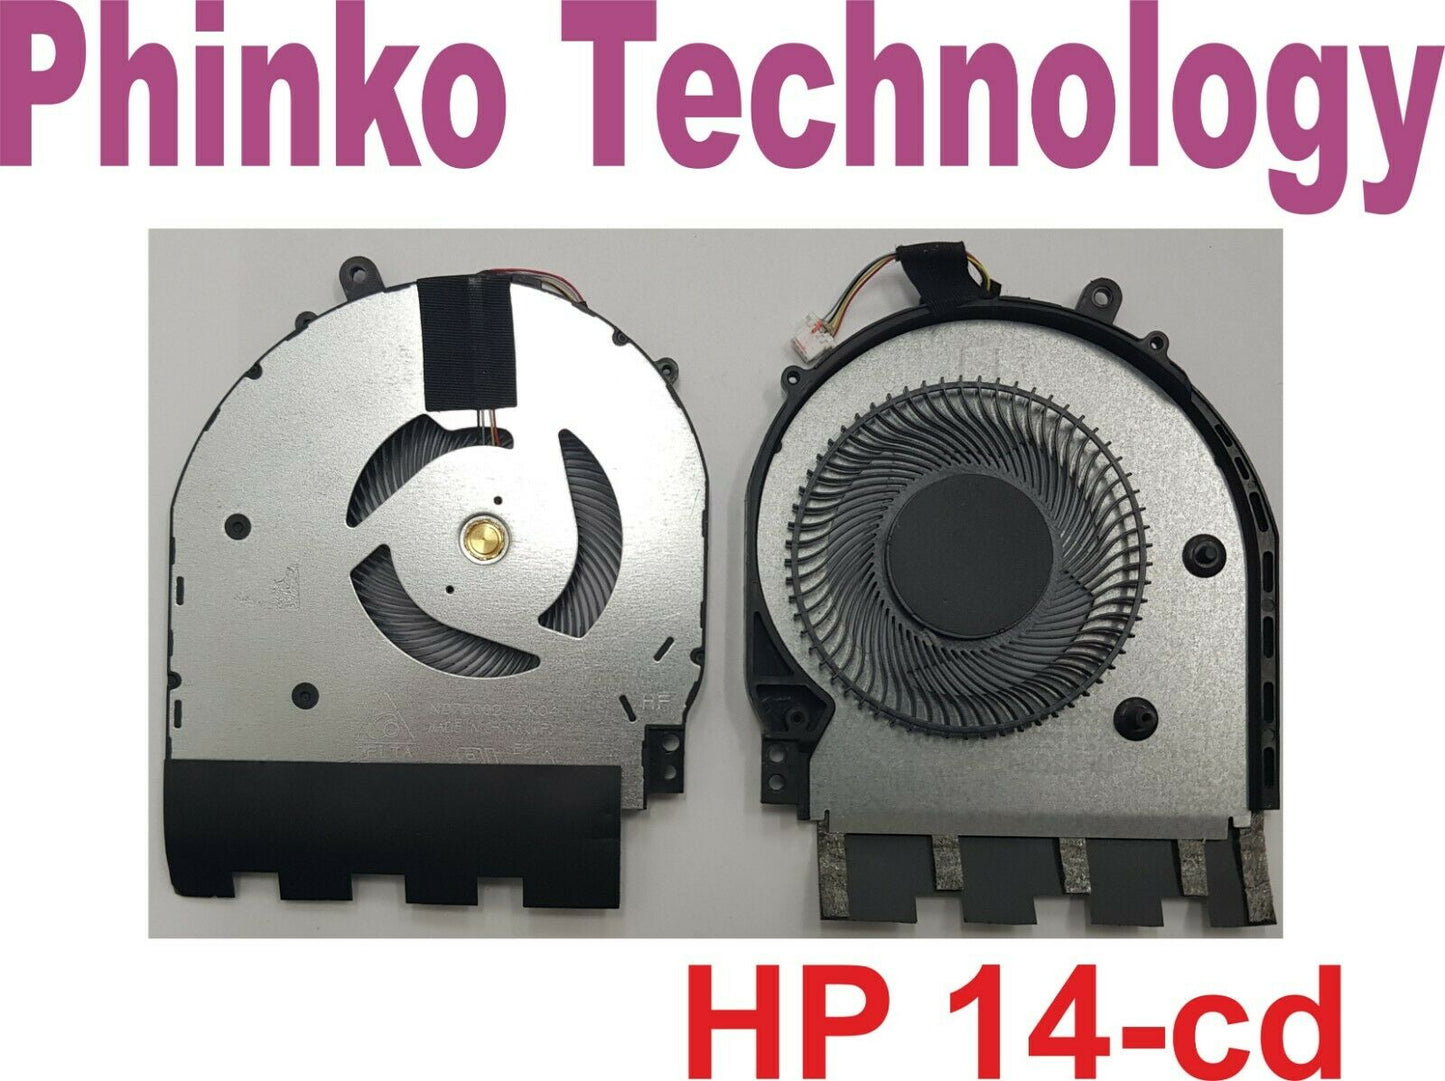 NEW Fan CPU Cooling for HP Pavilion x360 14-cd Series